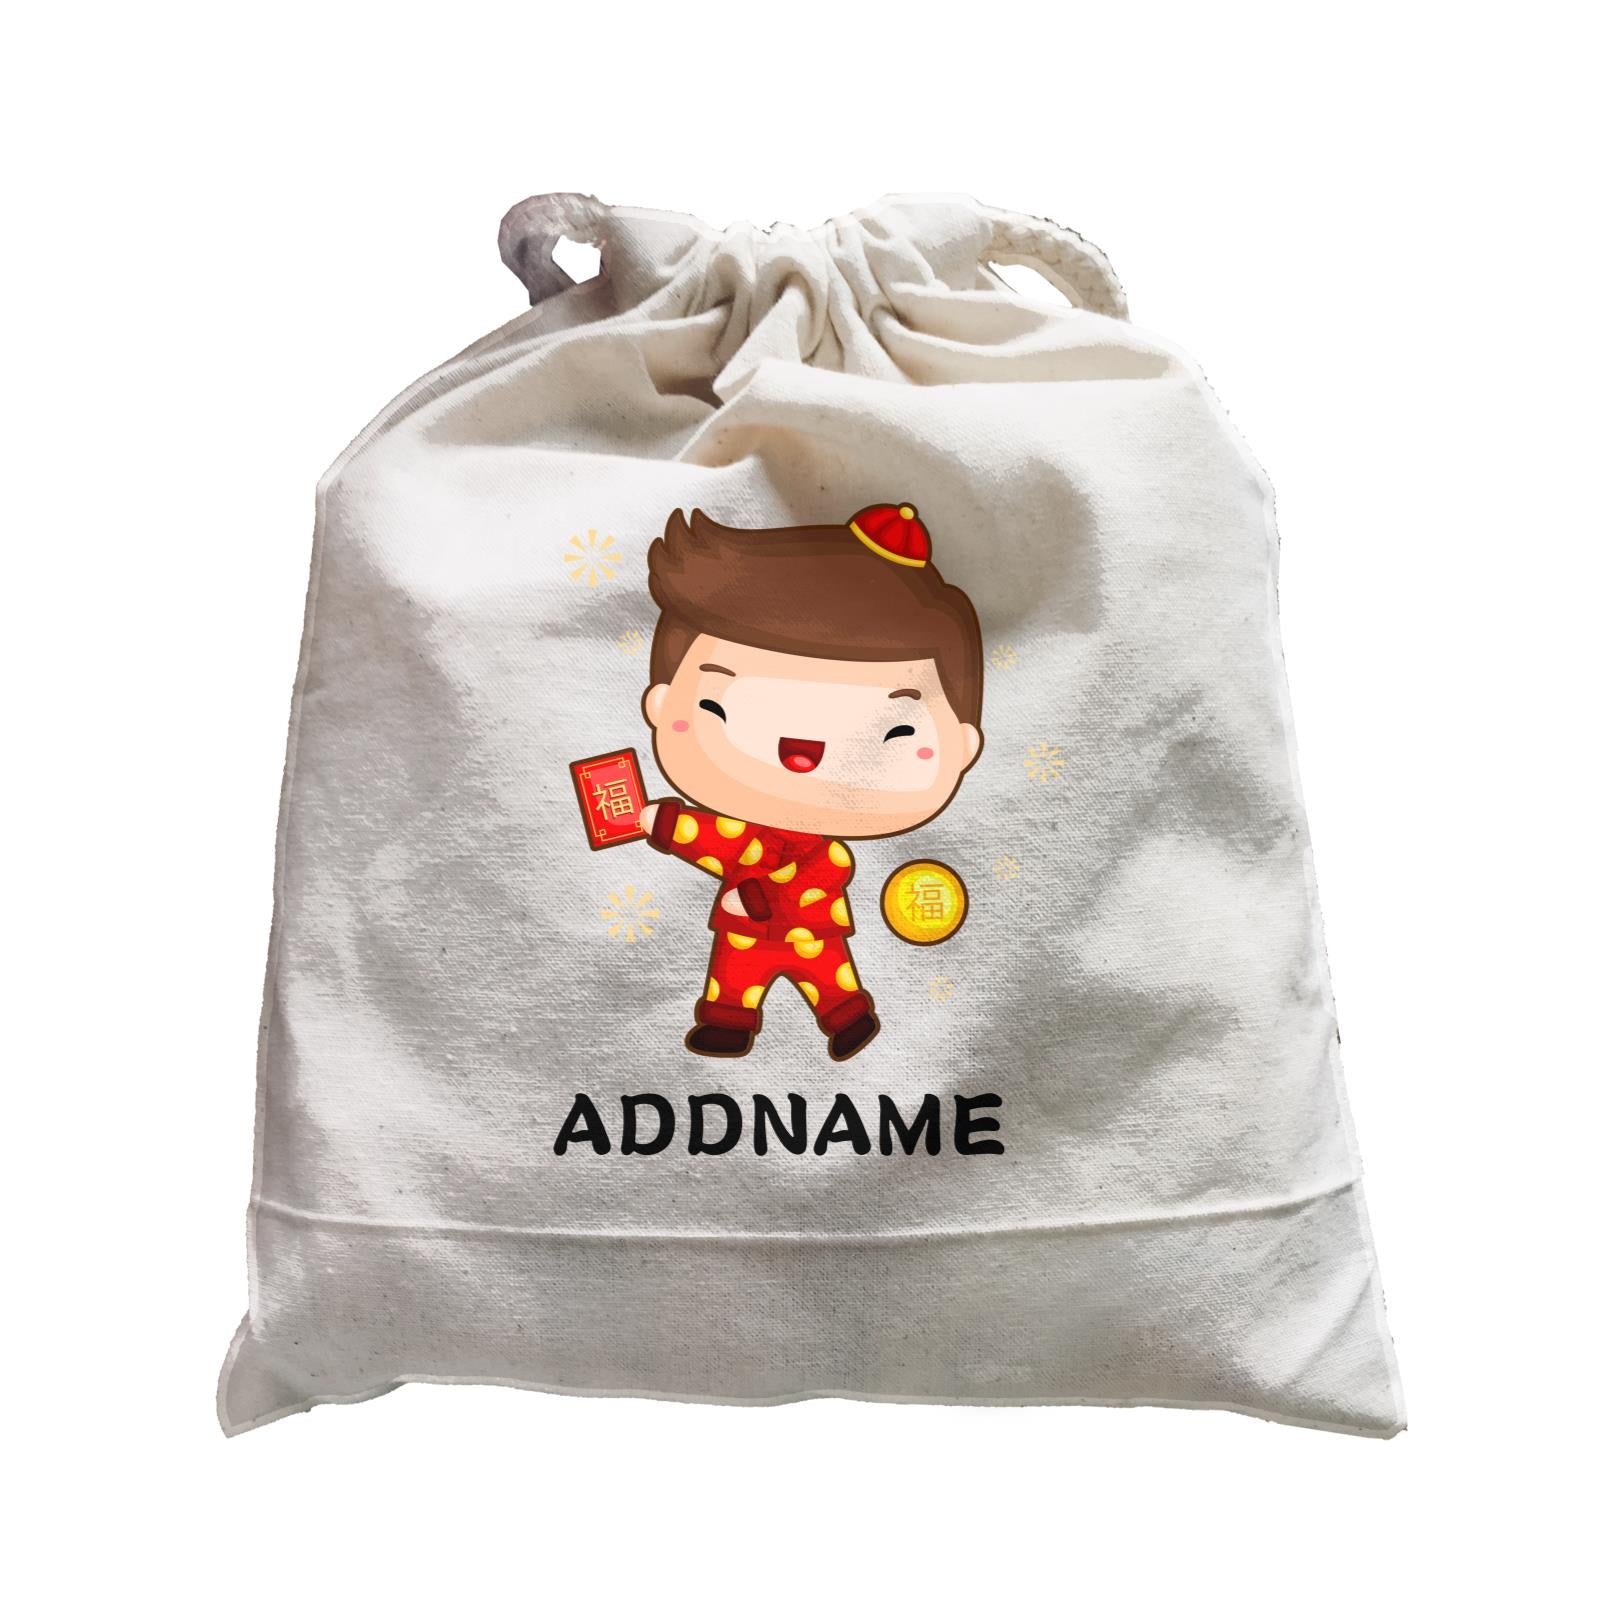 Cute CNY Boy with Red Packet and Happiness Symbol Satchel